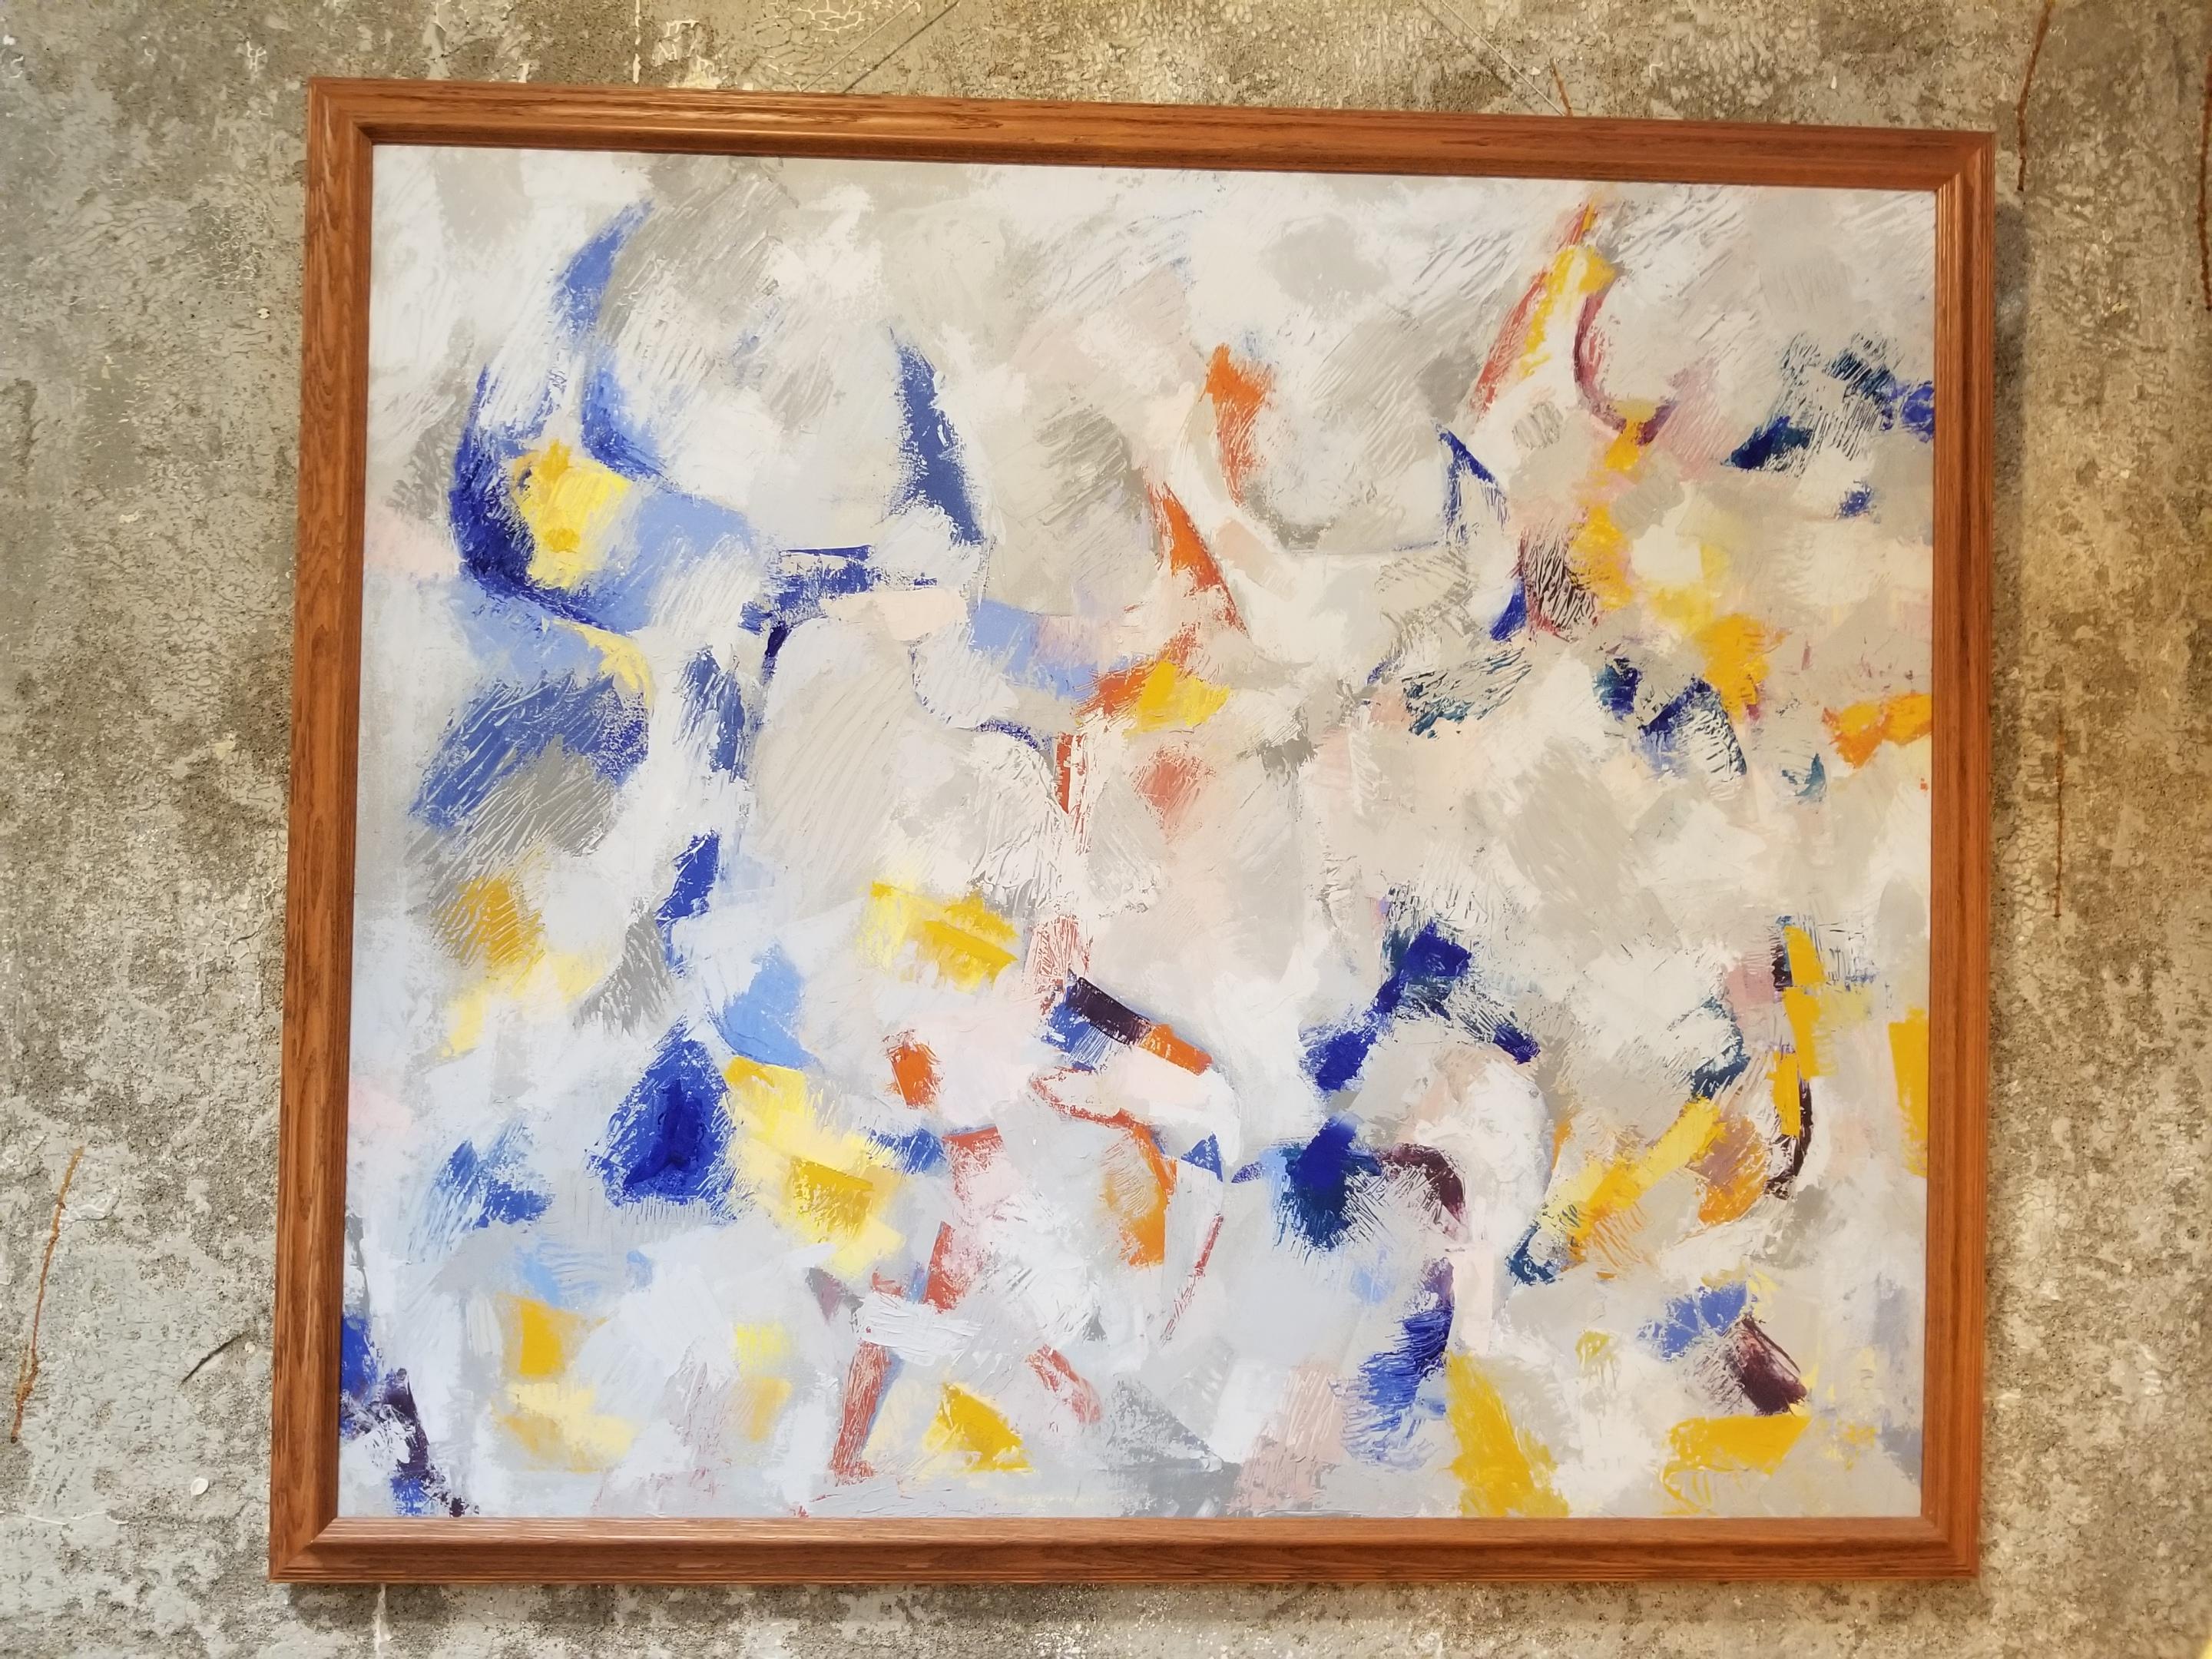 Abstract pastel painting on canvas, late 20th century. Pencil signed on verso, signature undecipherable. Mounted in oak frame. Measures: 38.88